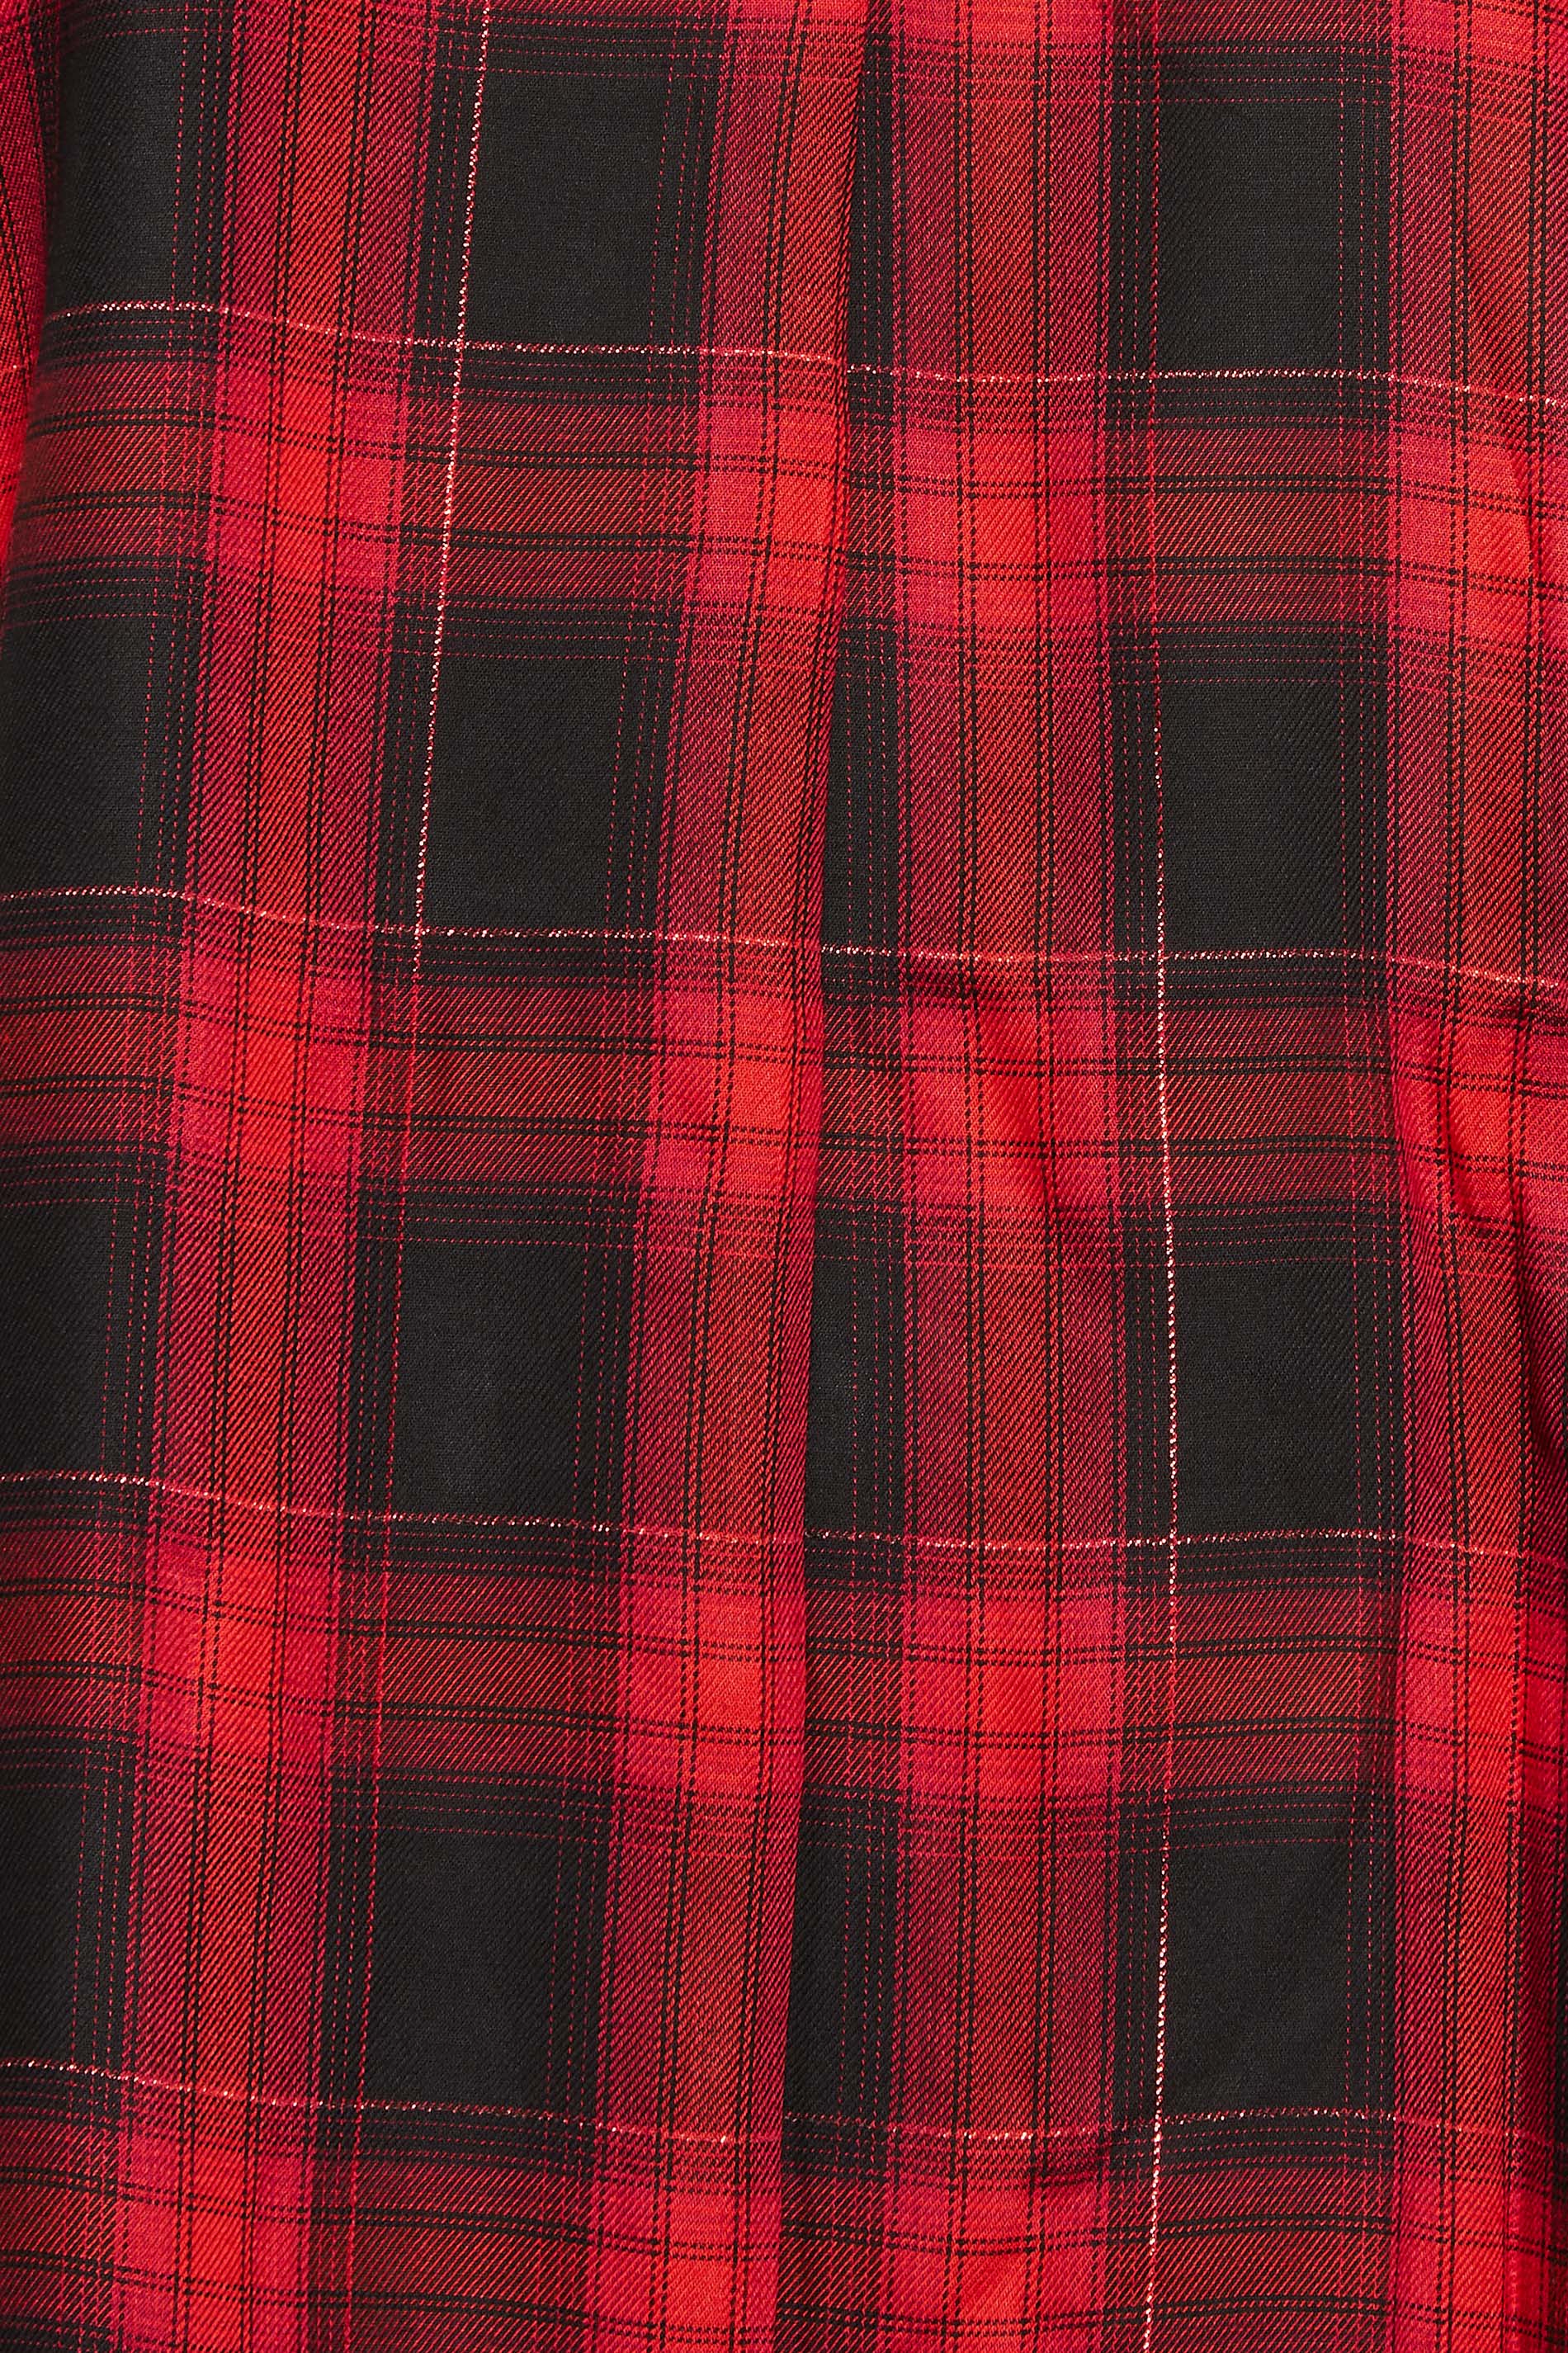 YOURS Curve Plus Size Red Check Print Shirt